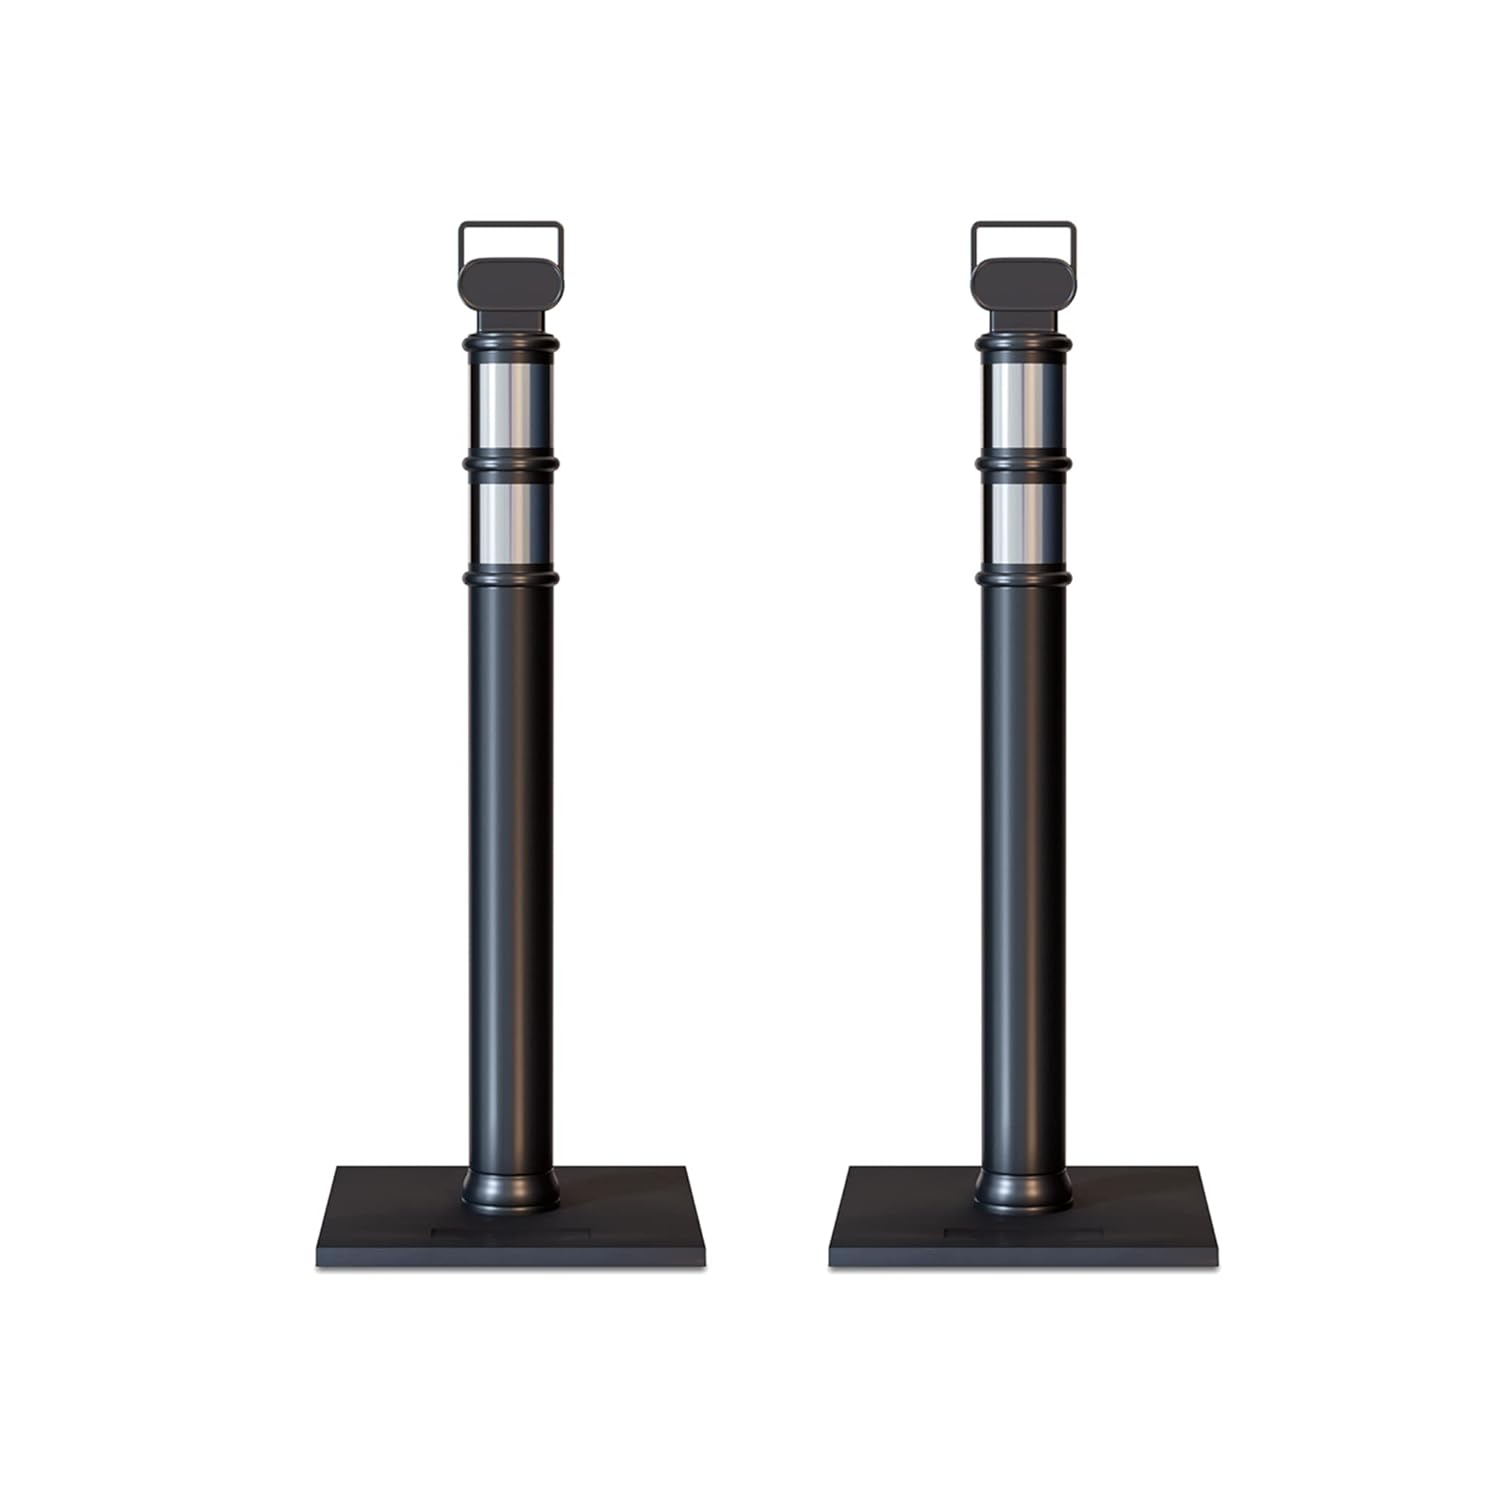 Generic Trafford Industrial Set of 2 45" Delineator Posts with Removable 10lb Rubber Base, Reflective Collars - Black